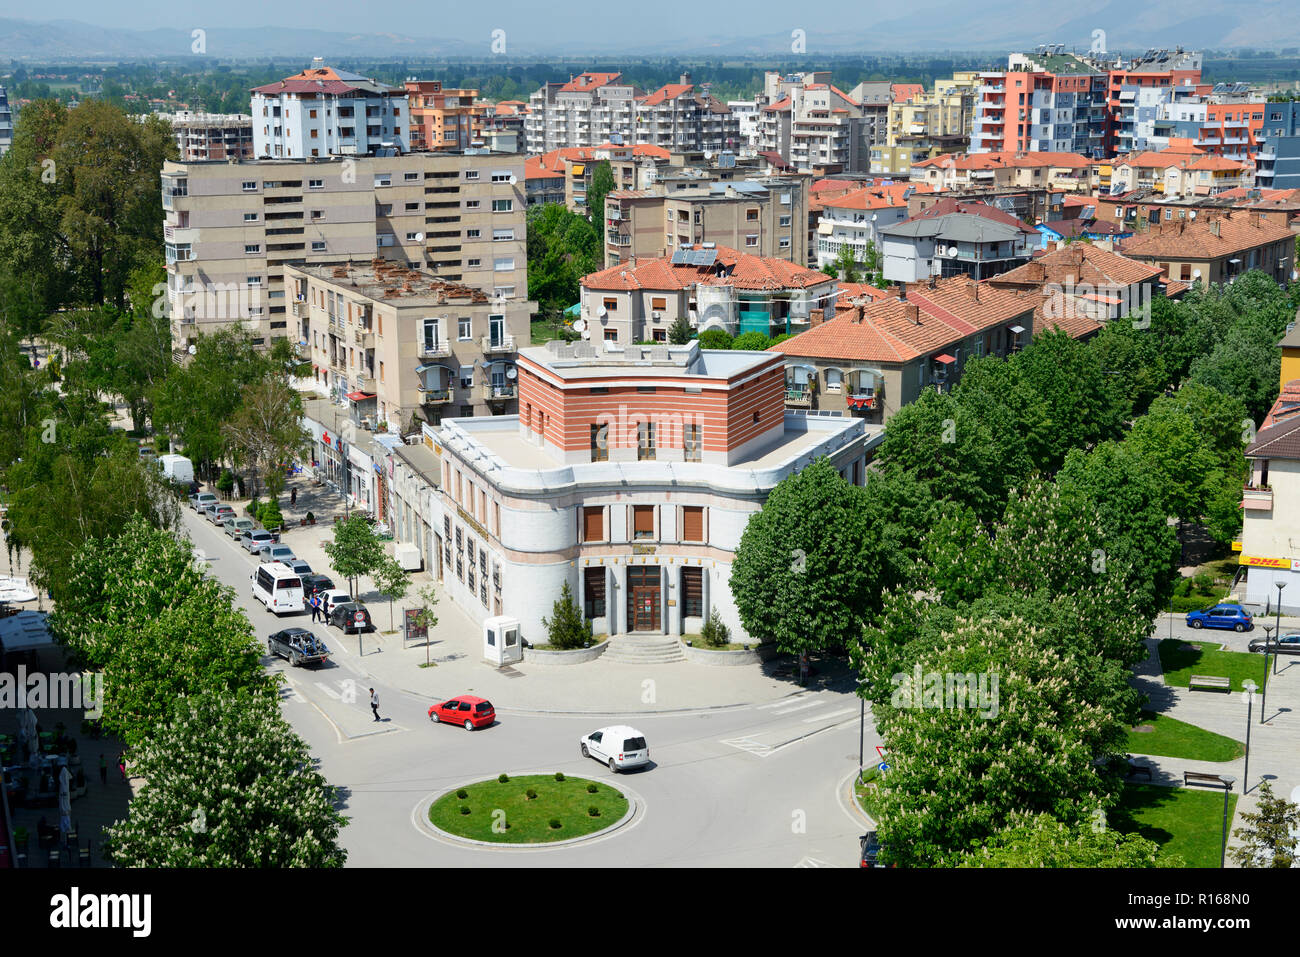 View from Red Tower, city center, Korca, Albania Stock Photo